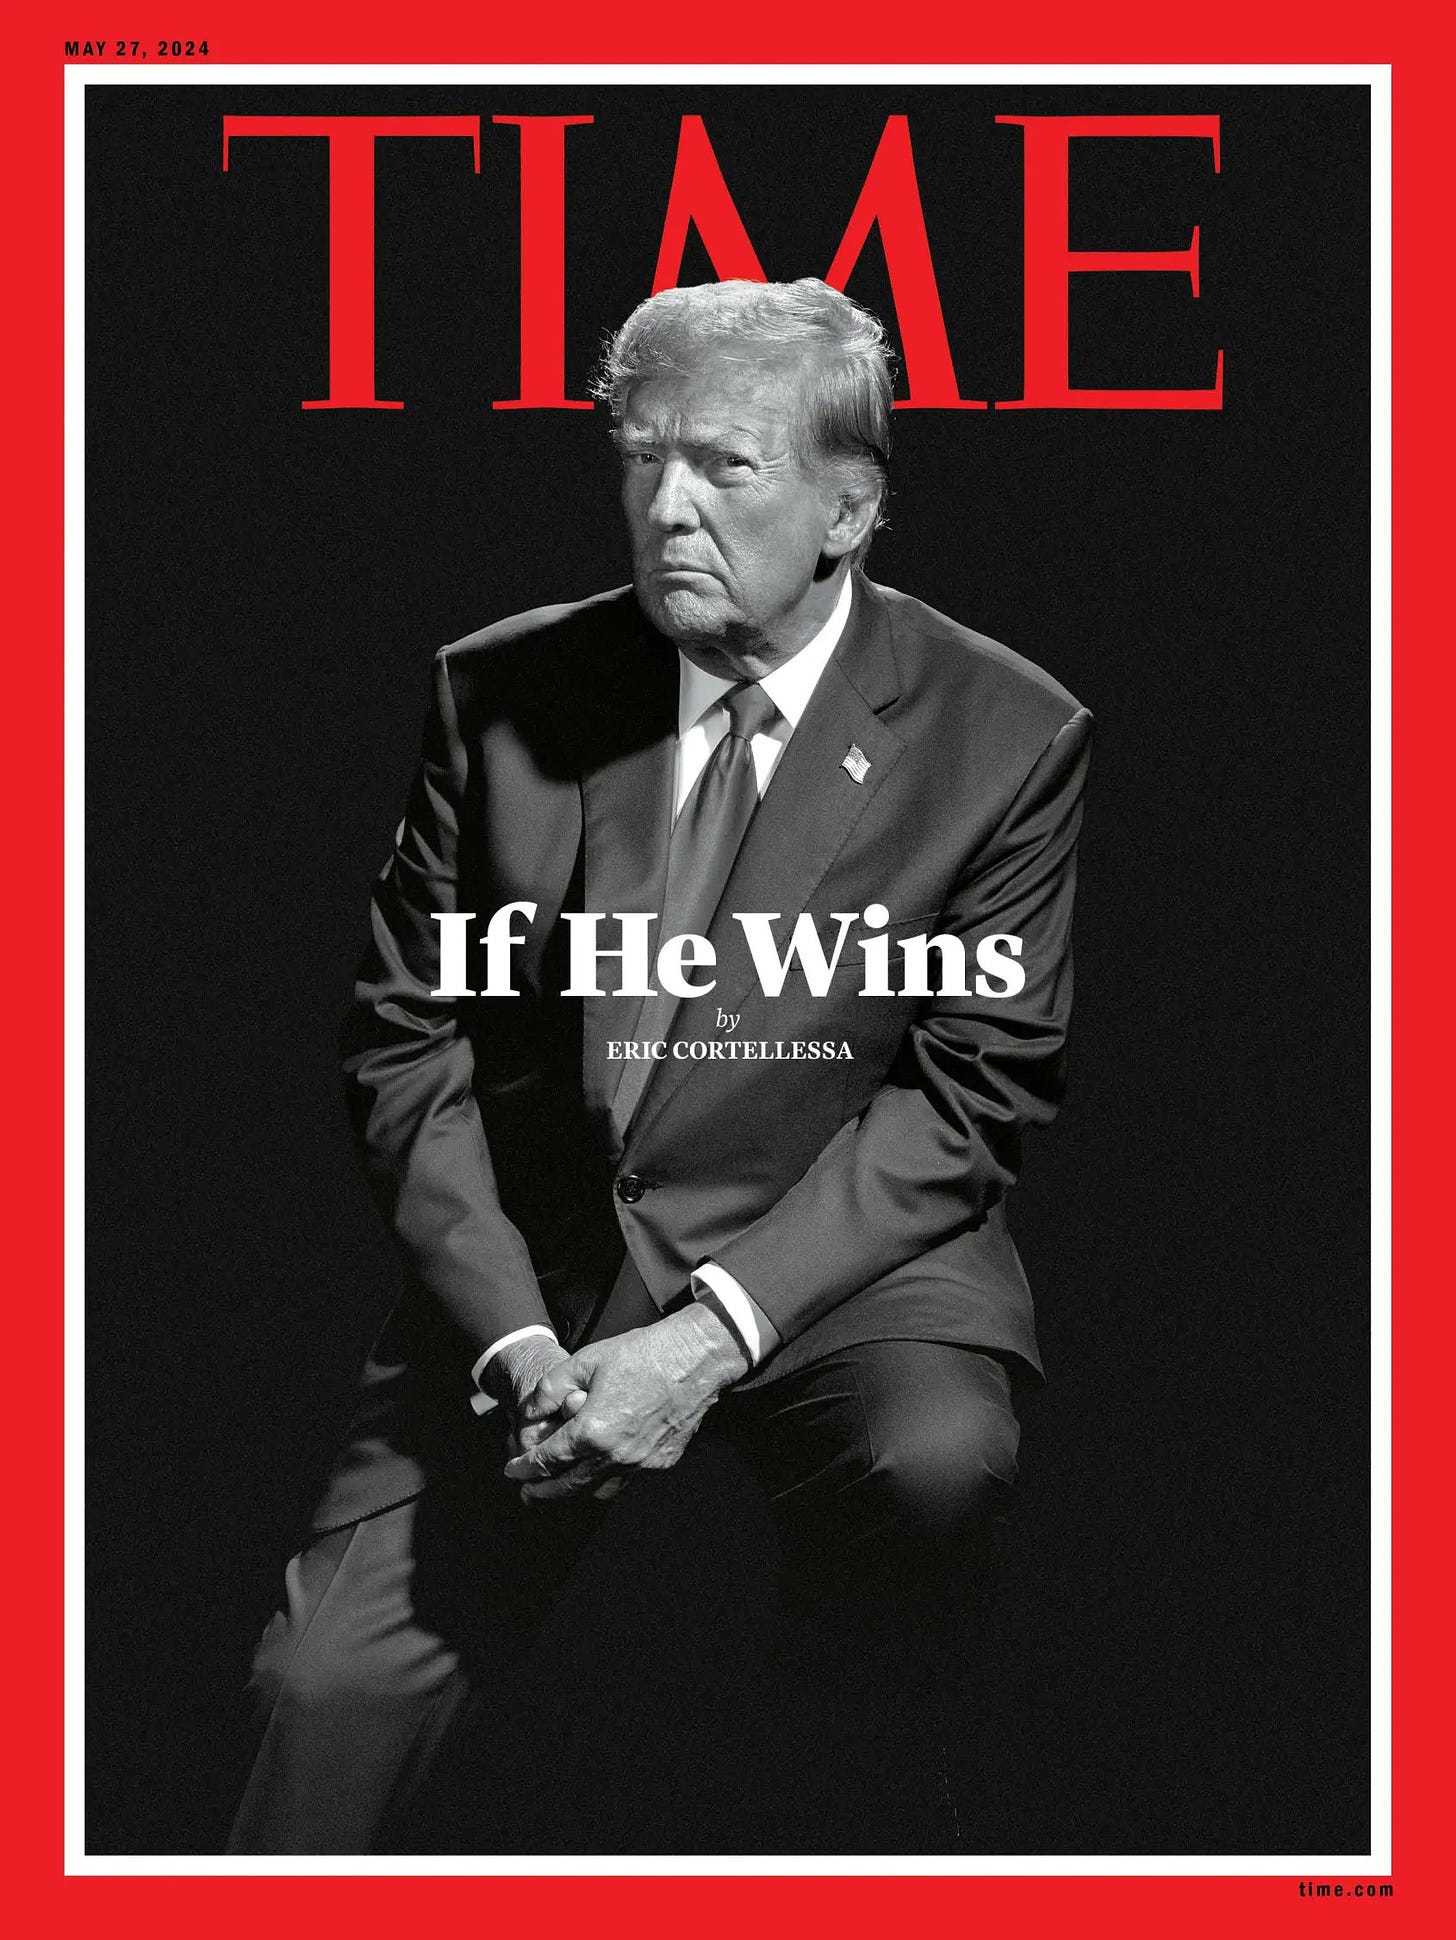 Image of Former President Donald Trump on the cover of the May 27, 2024, edition of Time